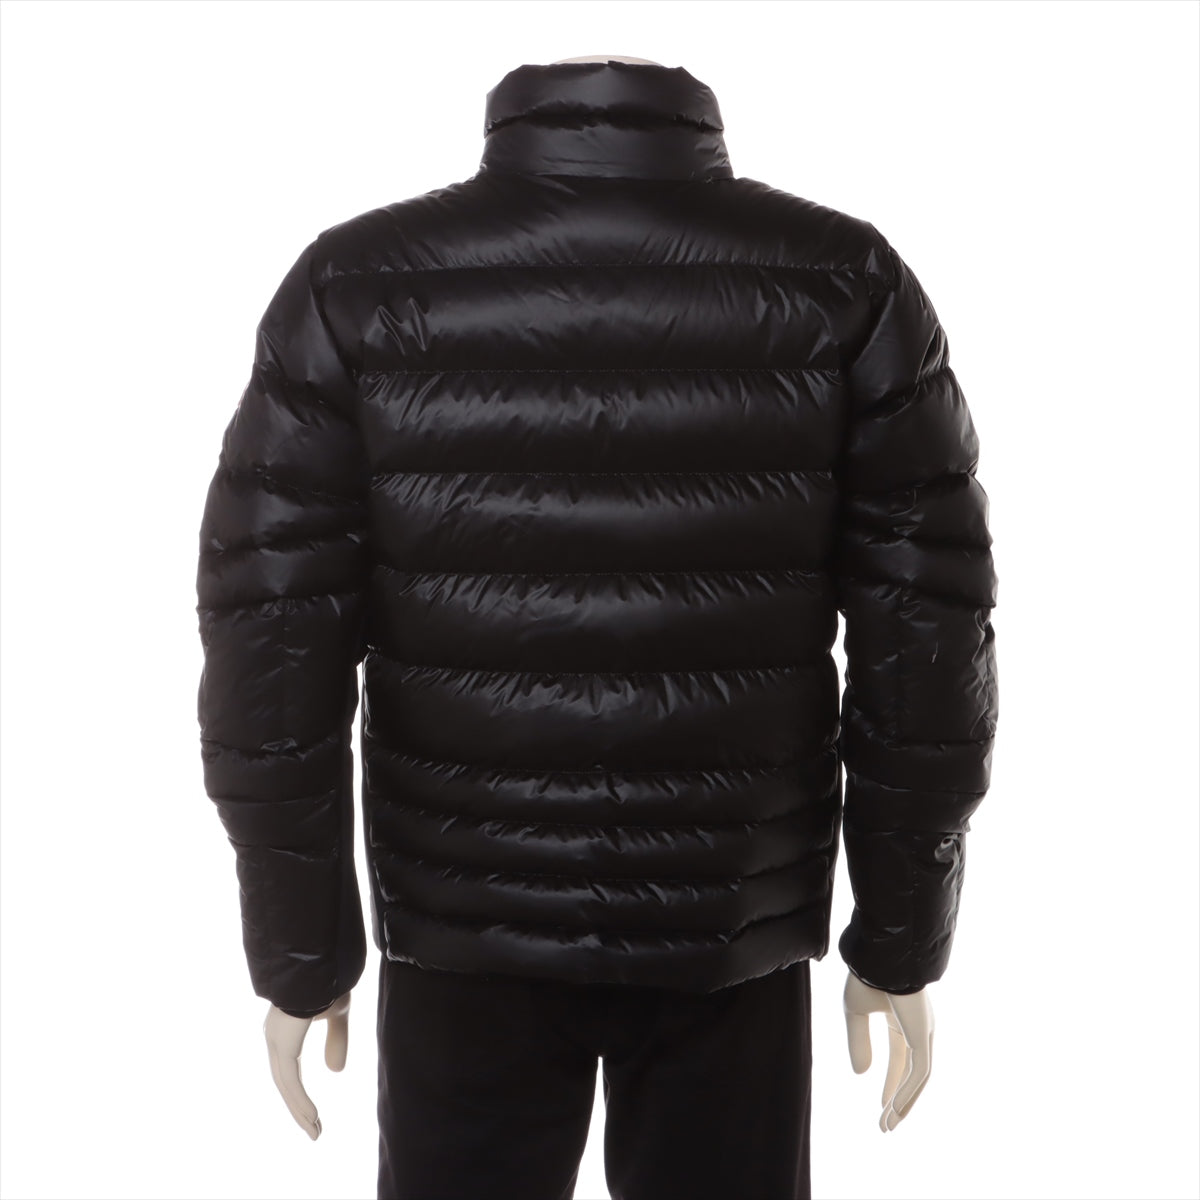 Moncler Grenoble CANMORE 20 years Polyester & nylon Down jacket 2 Men's Black